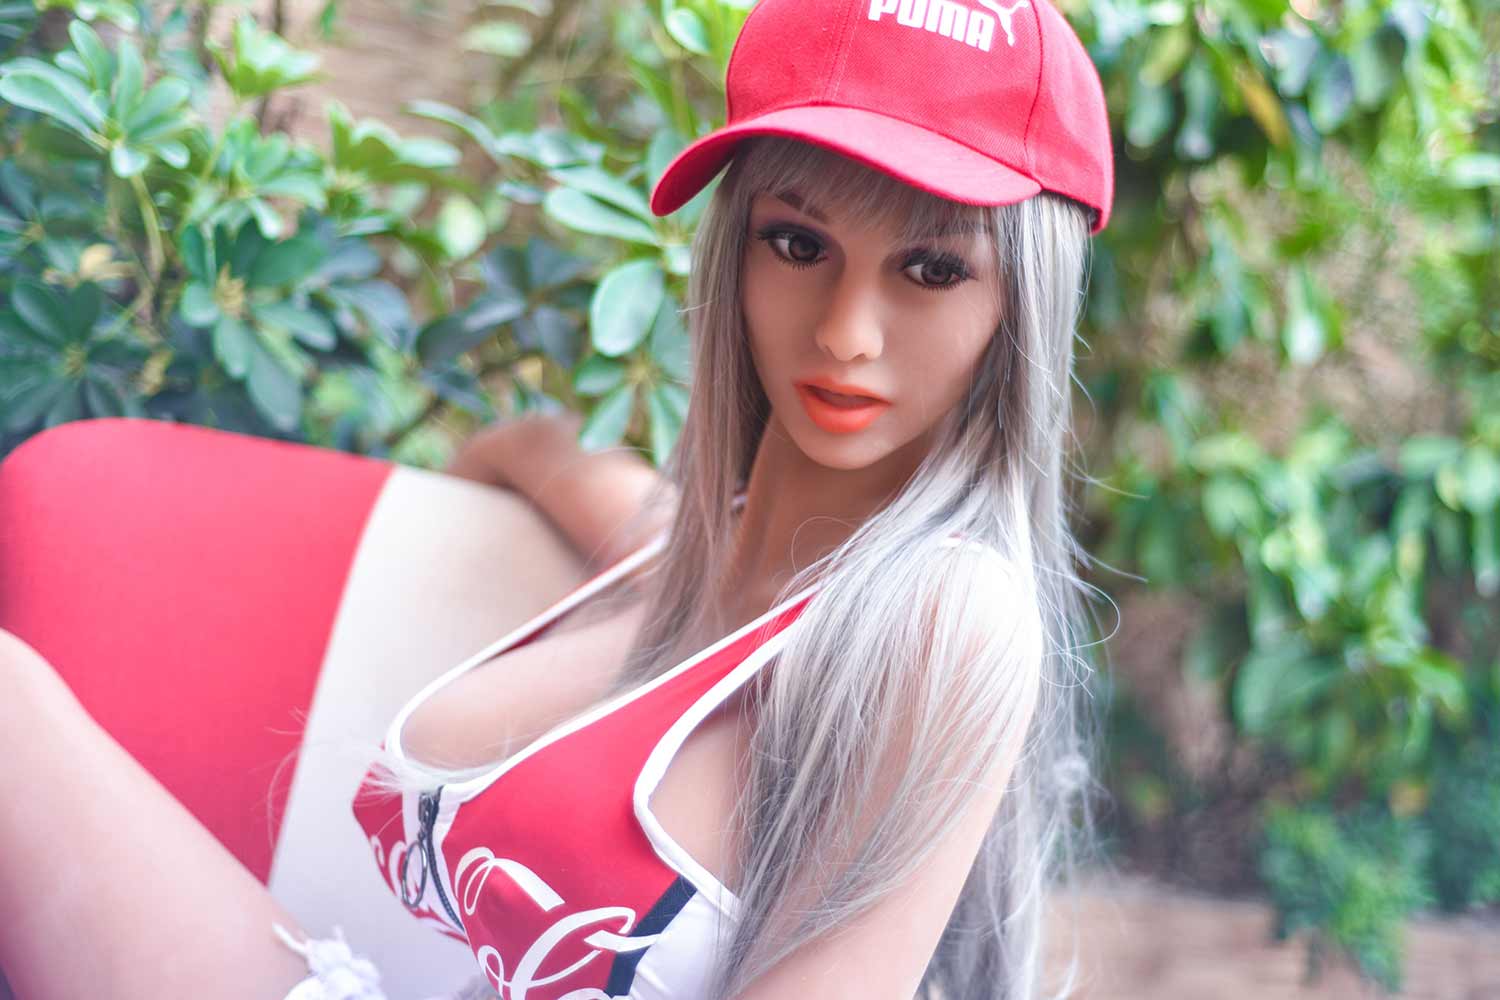 Big breasted sex doll in a red hat